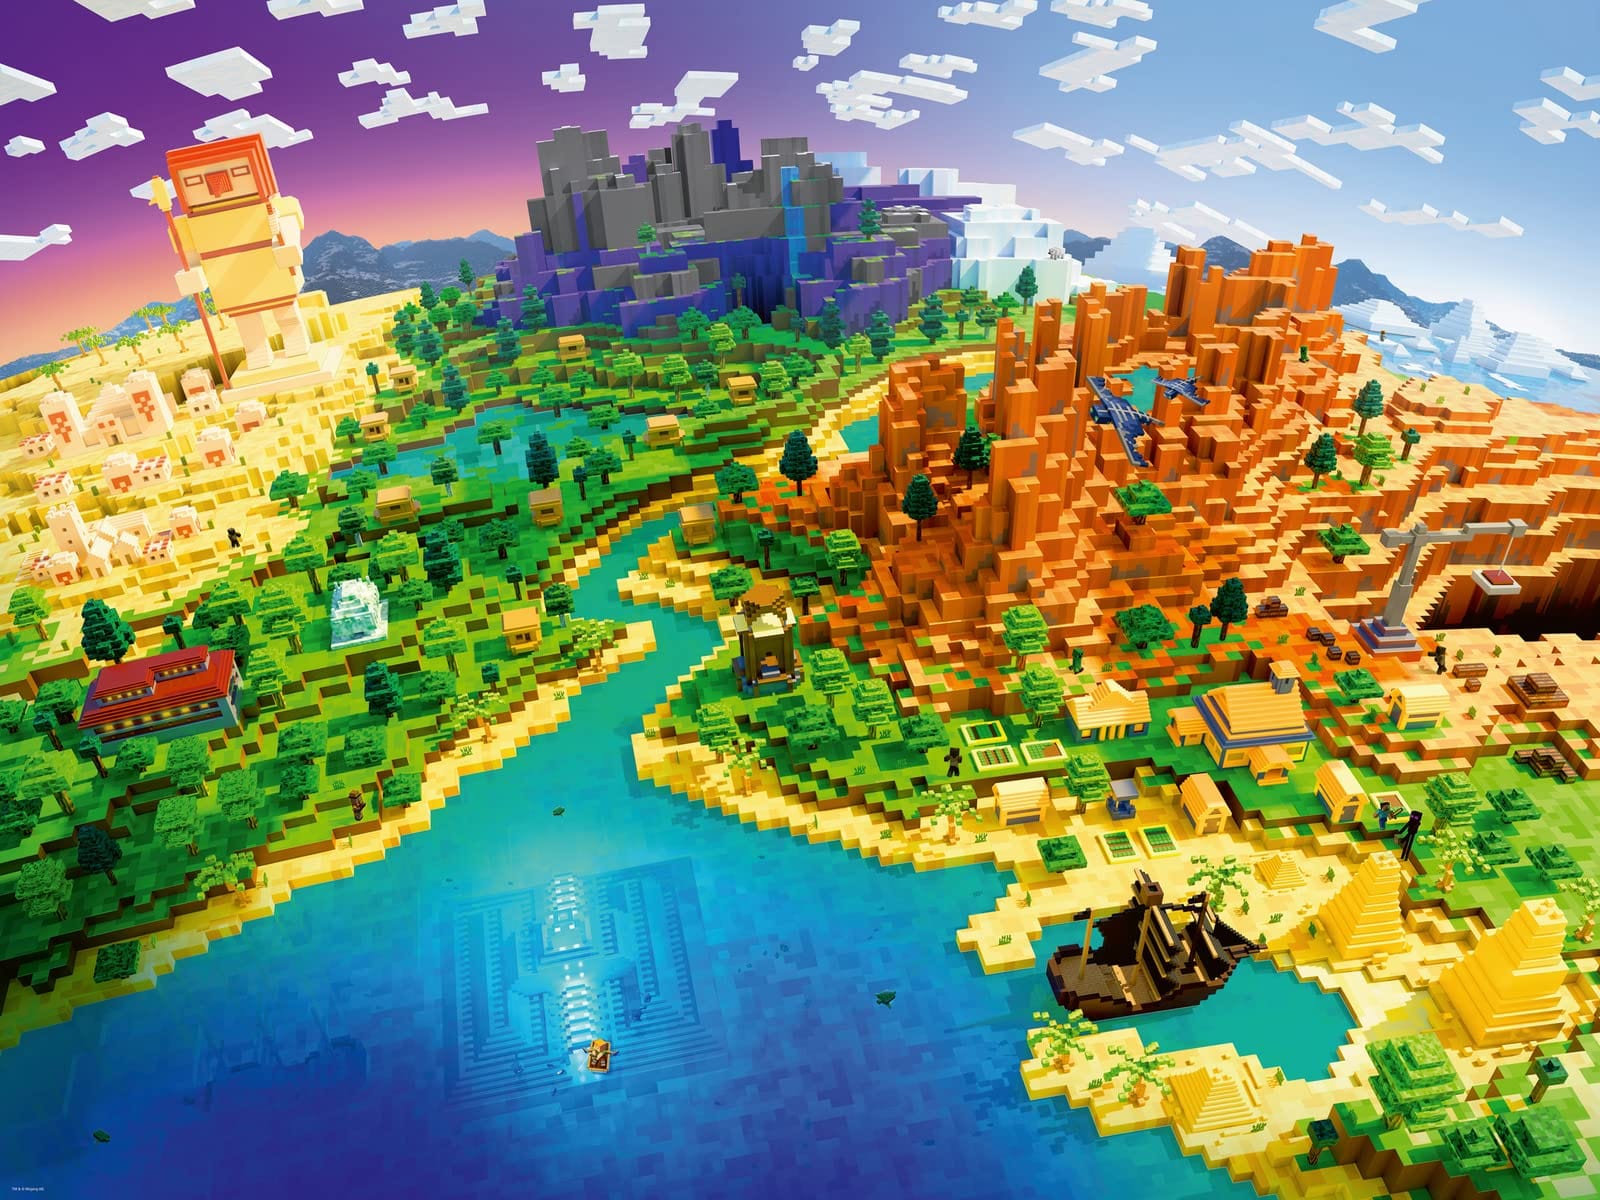 Ravensburger Toys and Collectible Ravensburger World of Minecraft 1500pc Puzzle